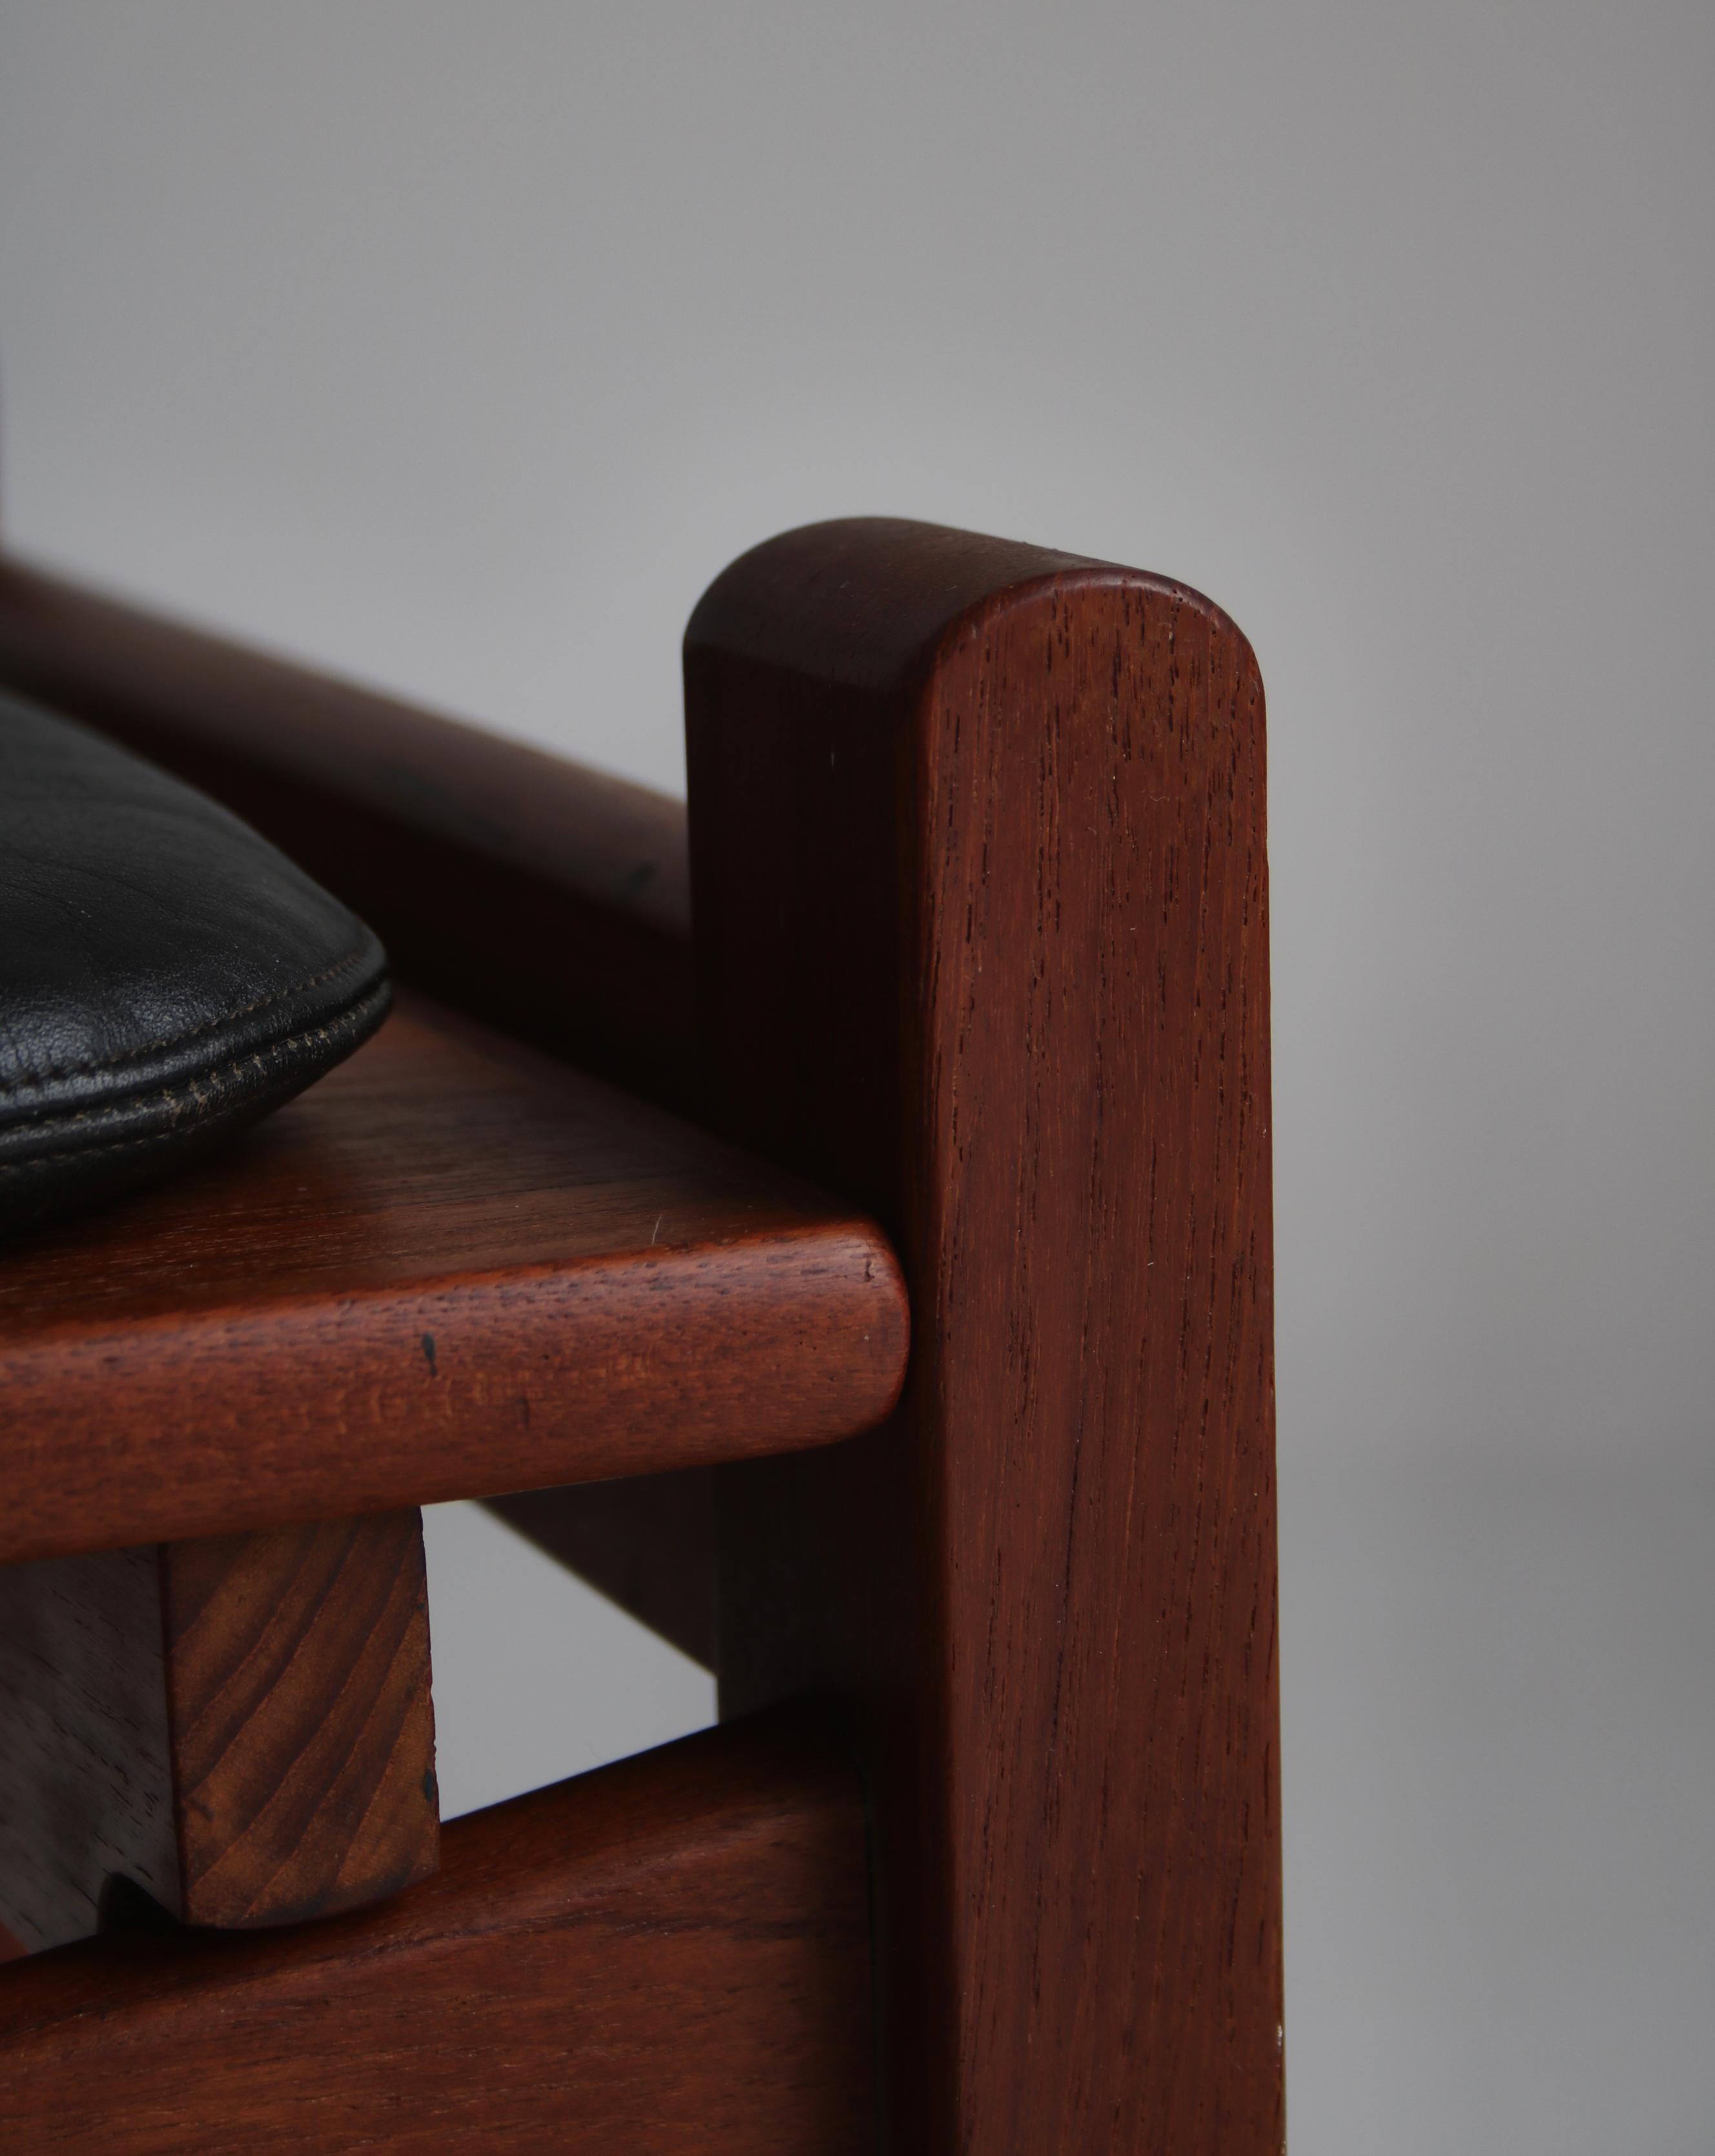 Danish Modern Stool / Sidetable in Teakwood and Black Leather, 1960s For Sale 3